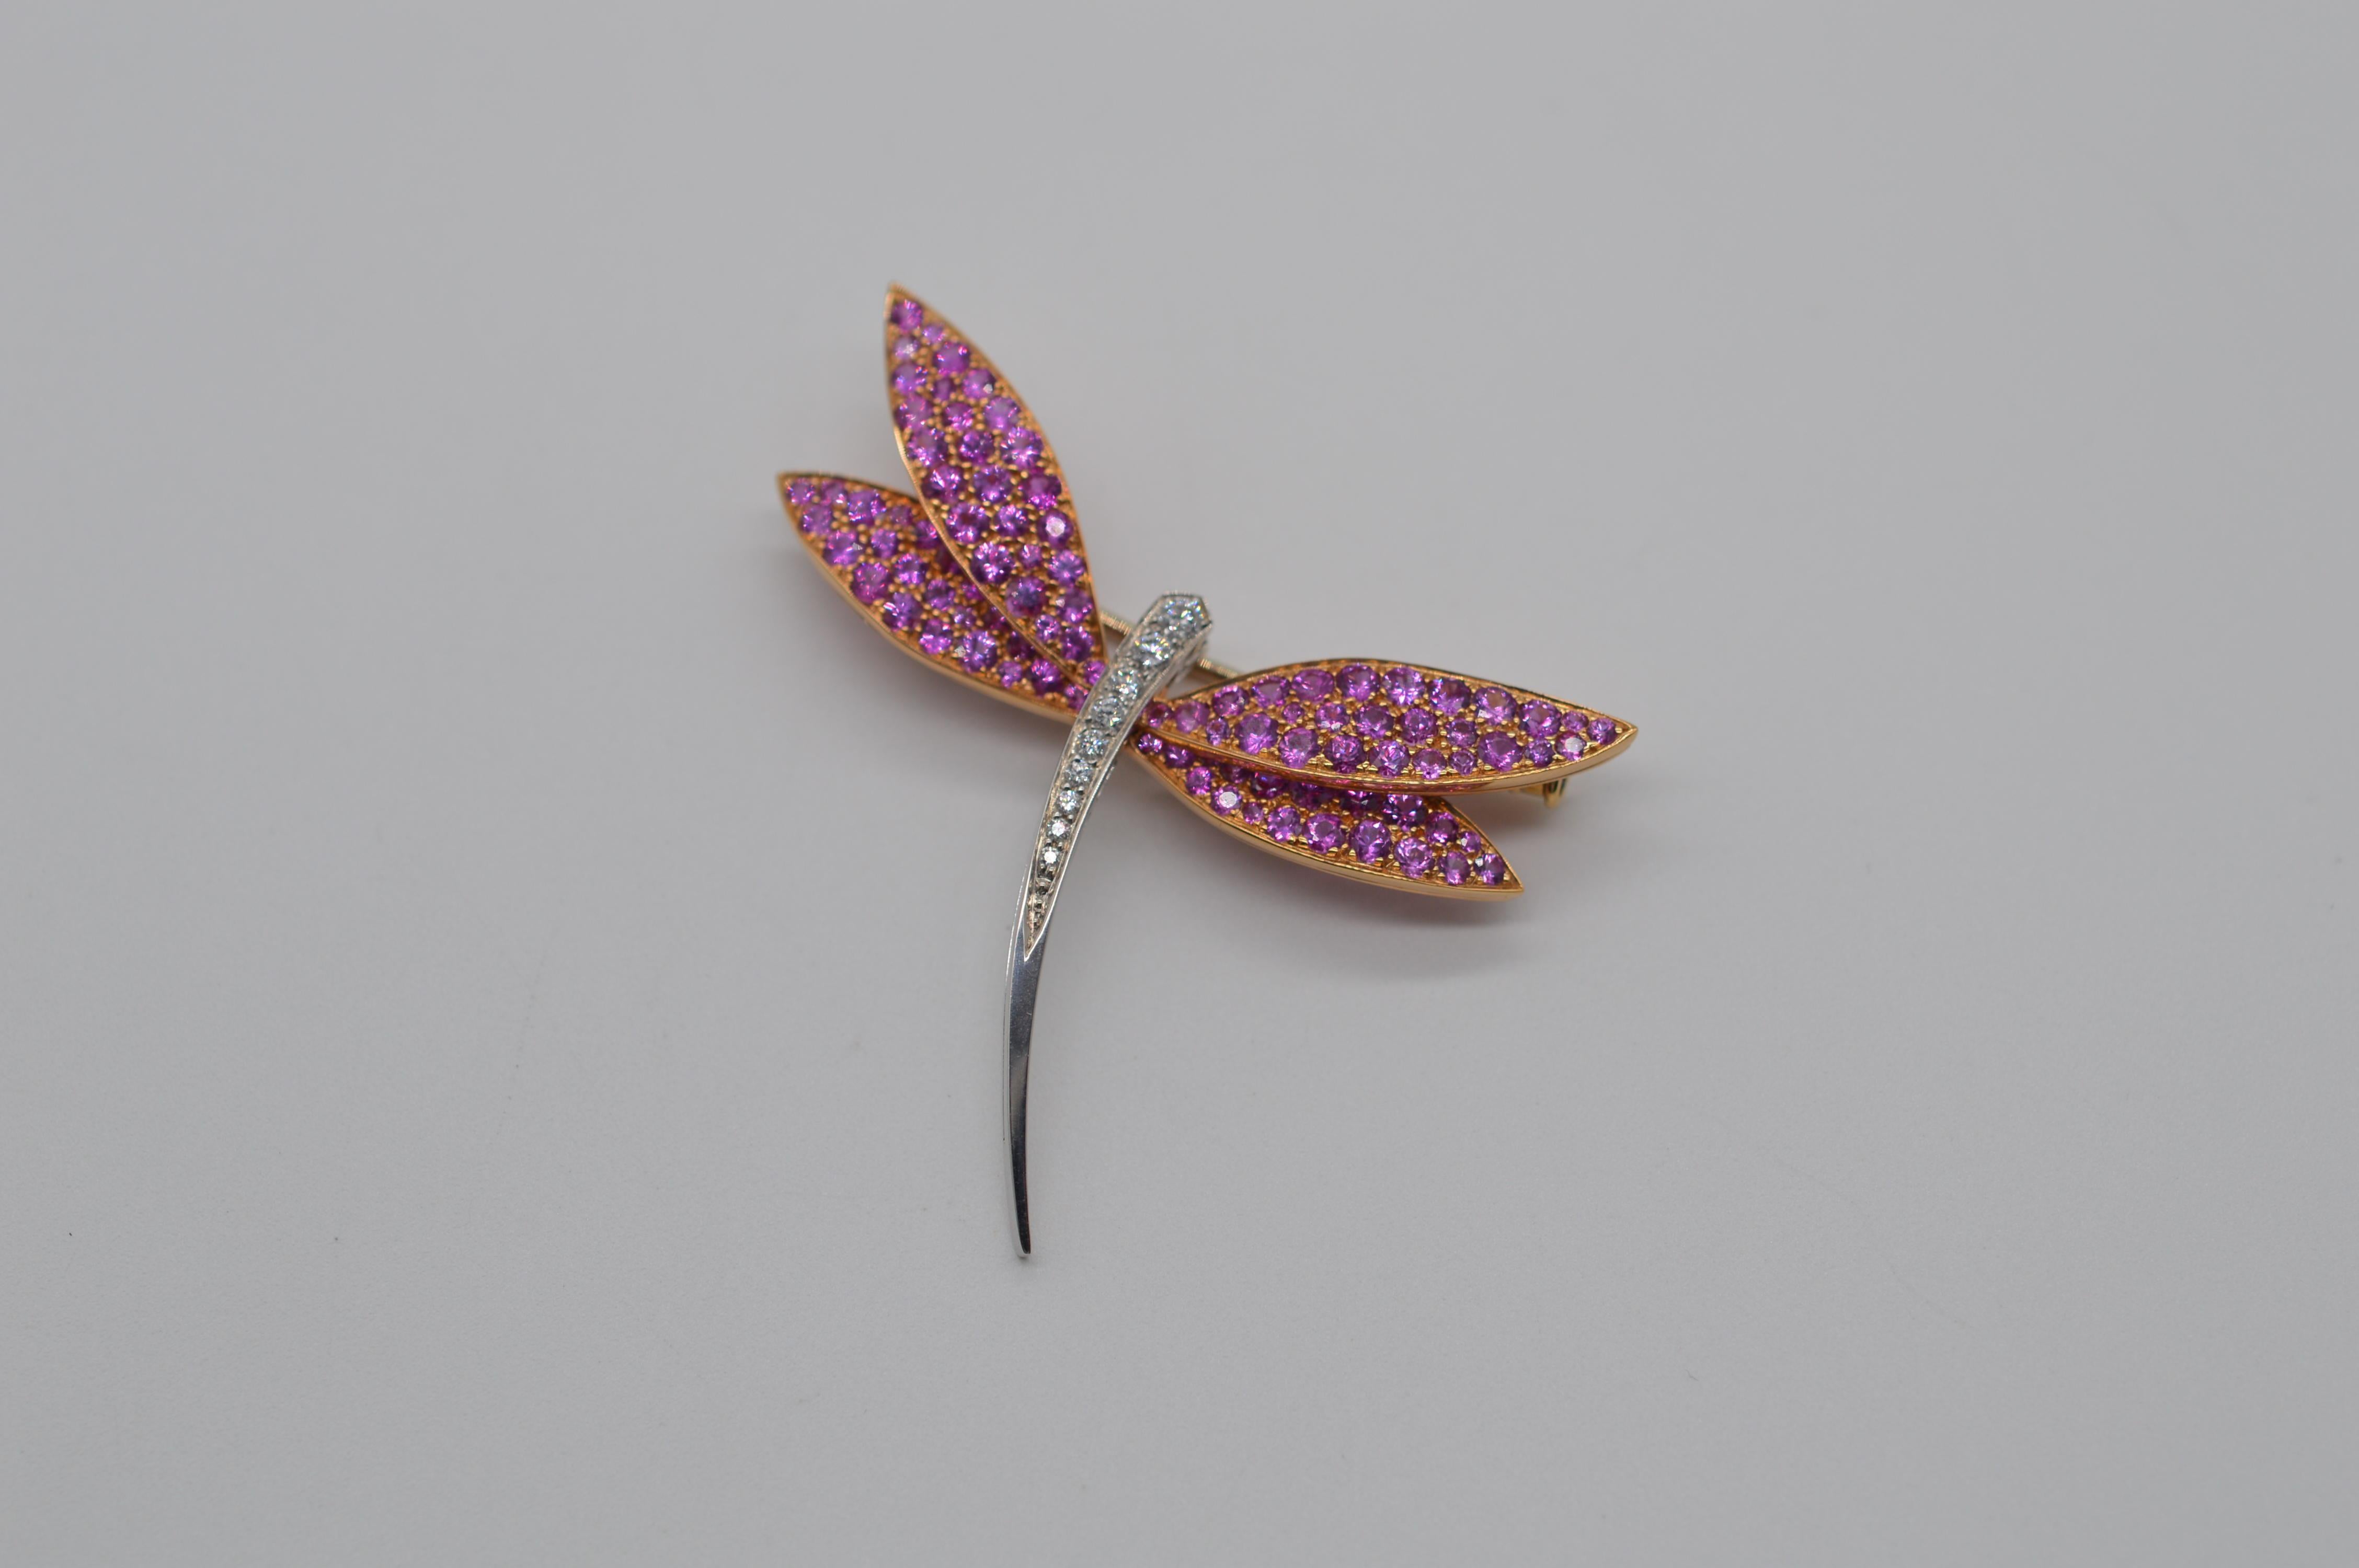 Van Cleef & Arpels Dragonfly Brooch Unworn
18K Yellow & White Gold
Weight 7.8 grams
Diamond & Pink Sapphires Setting
Set with 9 Round Diamond for a total weight of 0.24 carats ( Color D-E / Clarity VVS1-VVS2 ) / Set with 92 Pink Sapphires for an